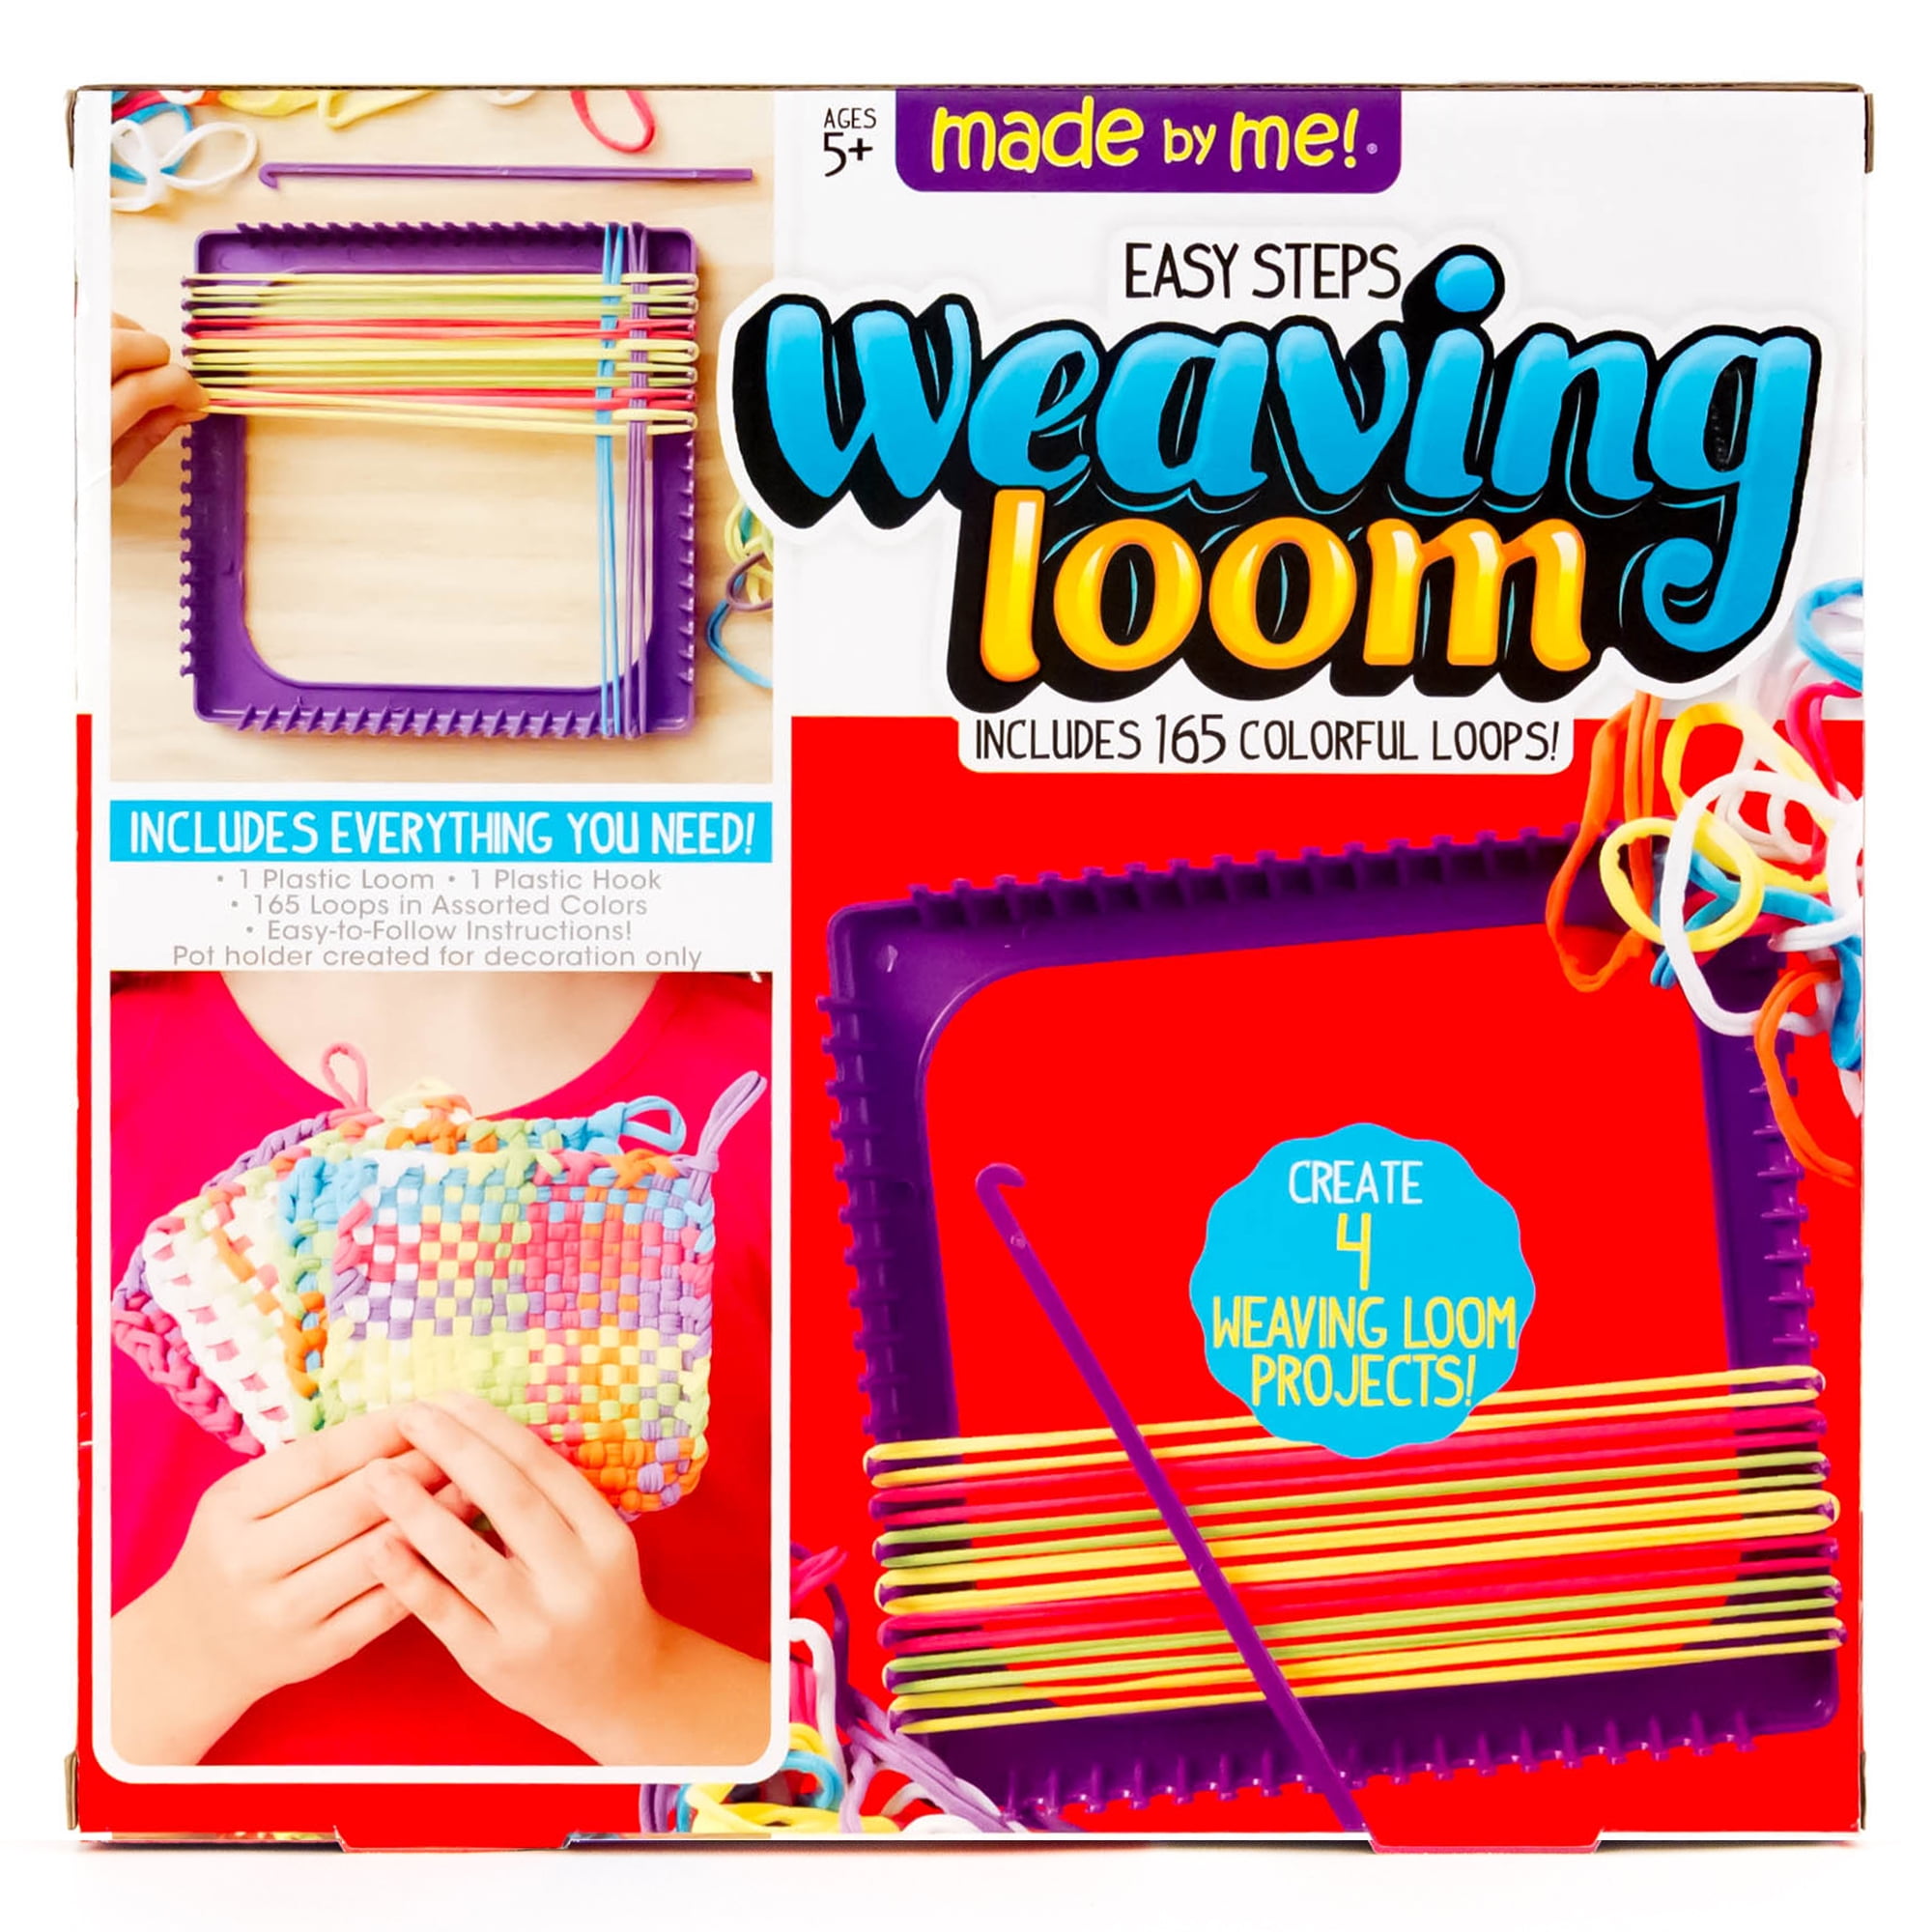 Made By Me Ultimate Weaving Loom, Includes 378 Craft Loops & 1 Weaving Loom  with Tool, Makes 25 Projects, 9 Rainbow Colors of Weaving Loops, Hook 